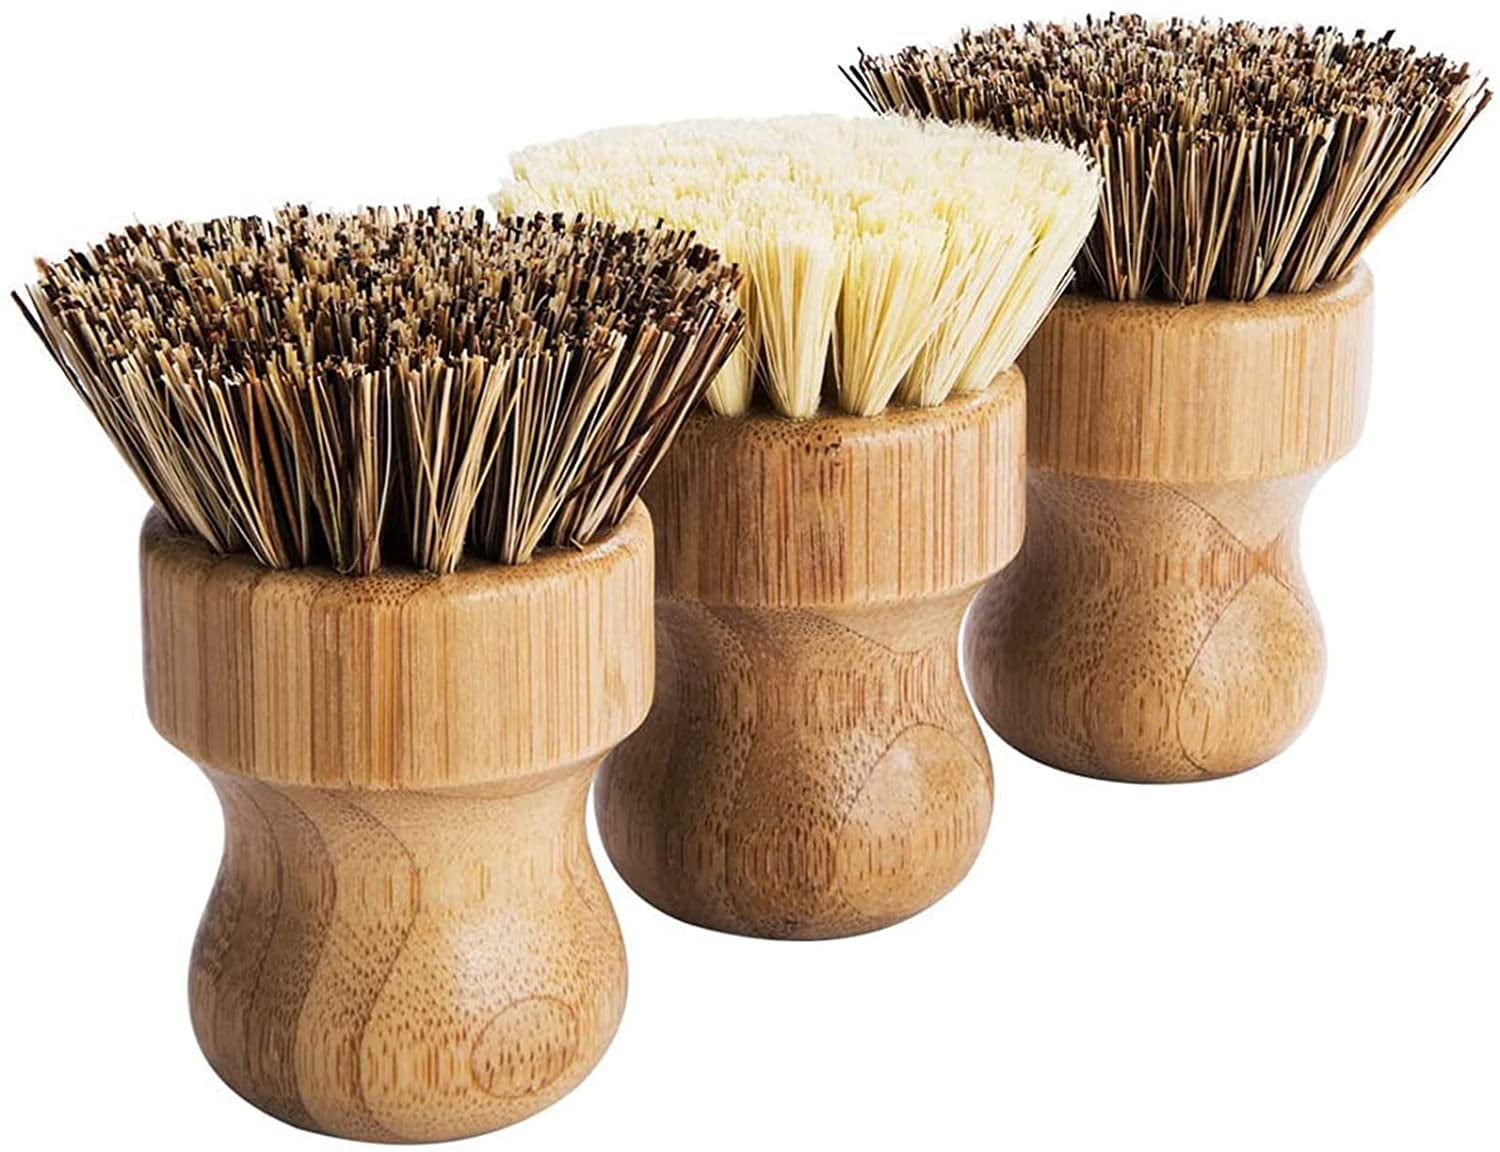  Palm Pot Brush- Bamboo Round 3 Packs Mini Dish Brush Natural  Scrub Brush Durable Scrubber Cleaning Kit with Union Fiber and Tampico  Fiber for Cleaning Pots, Pans and Vegetables : Health